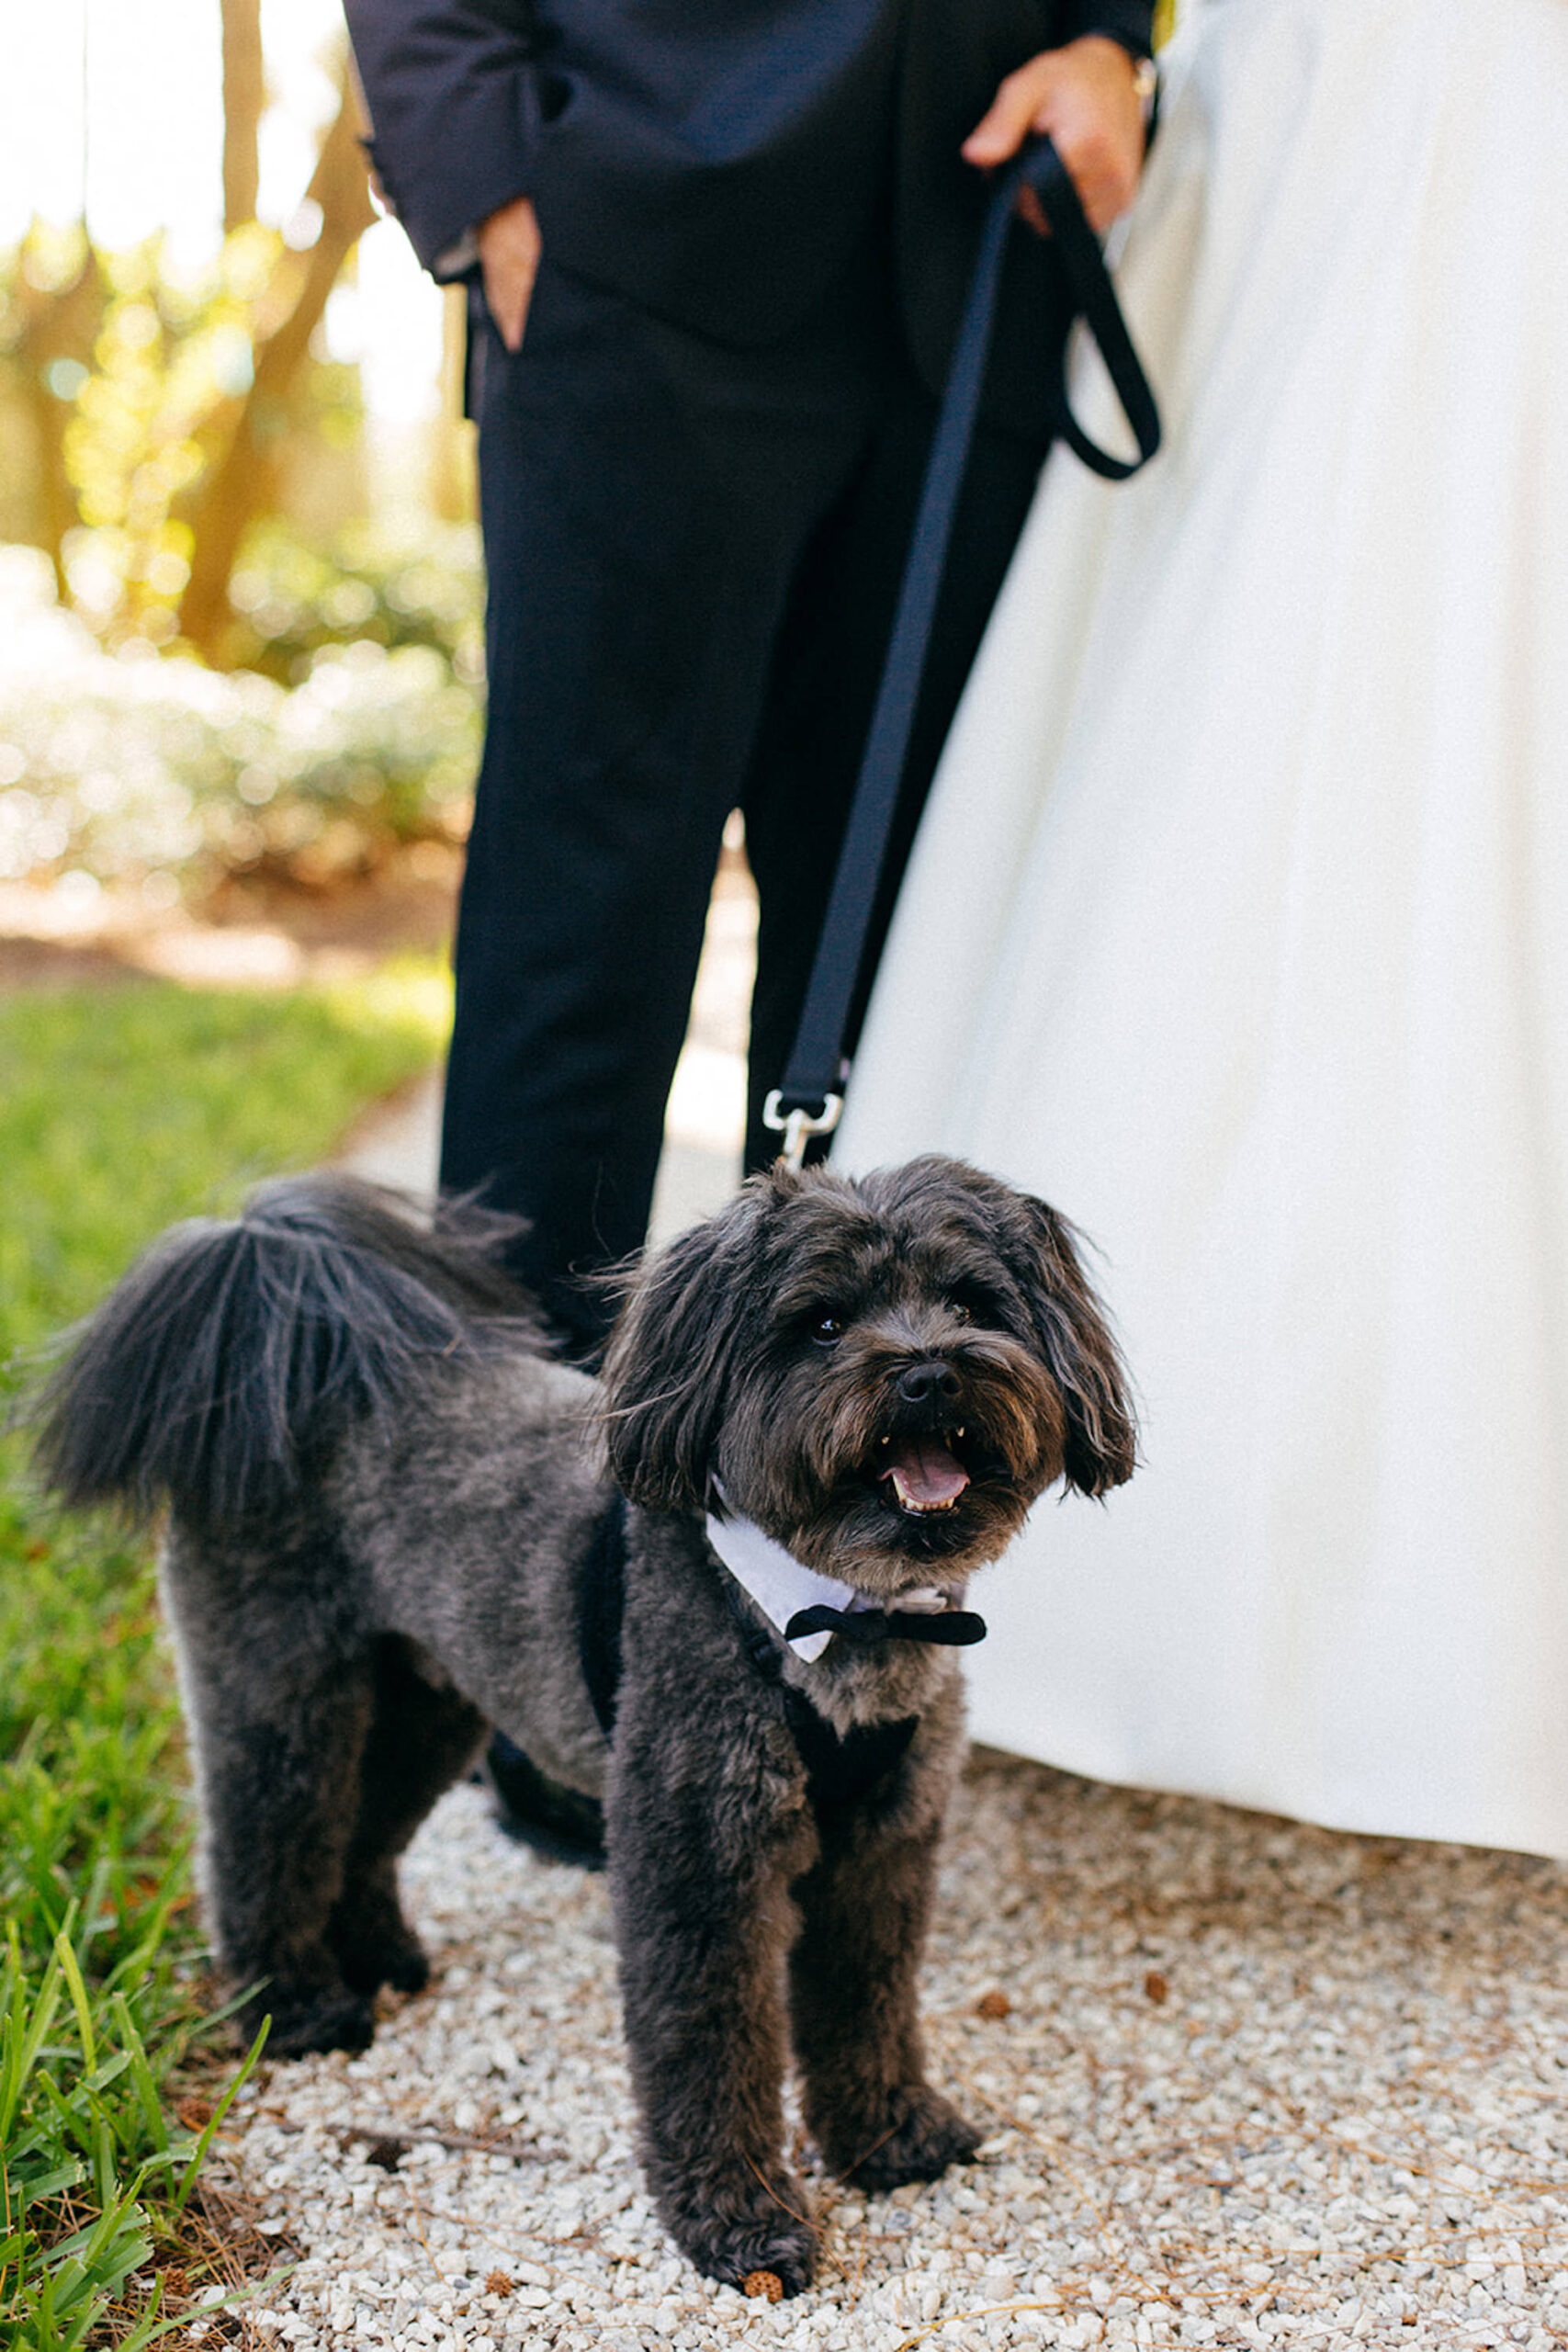 Small Black Dog Wearing Bowtie | Tampa Bay Wedding Pet Planner FairyTail Pet Care